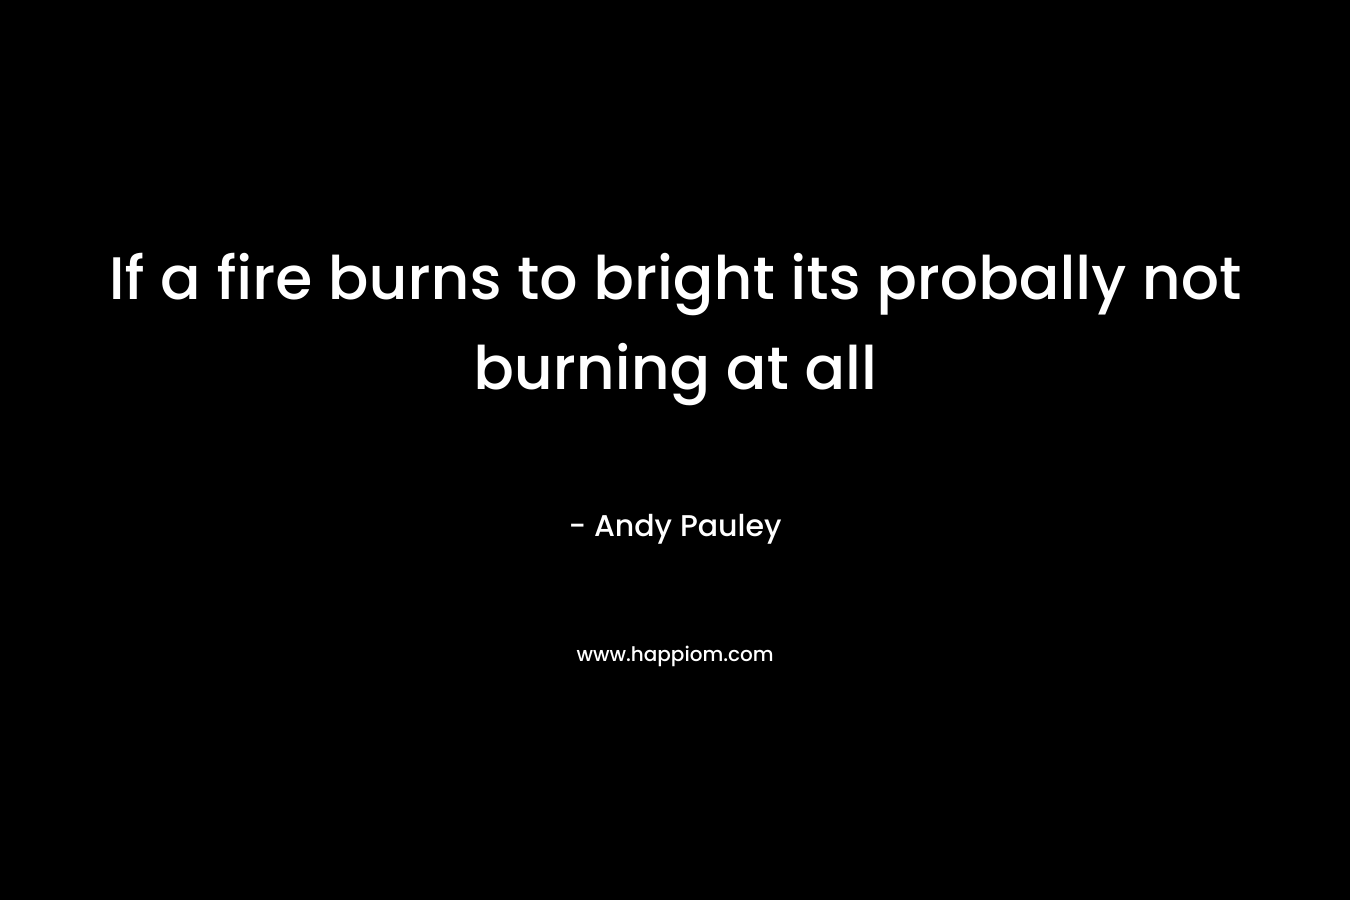 If a fire burns to bright its probally not burning at all